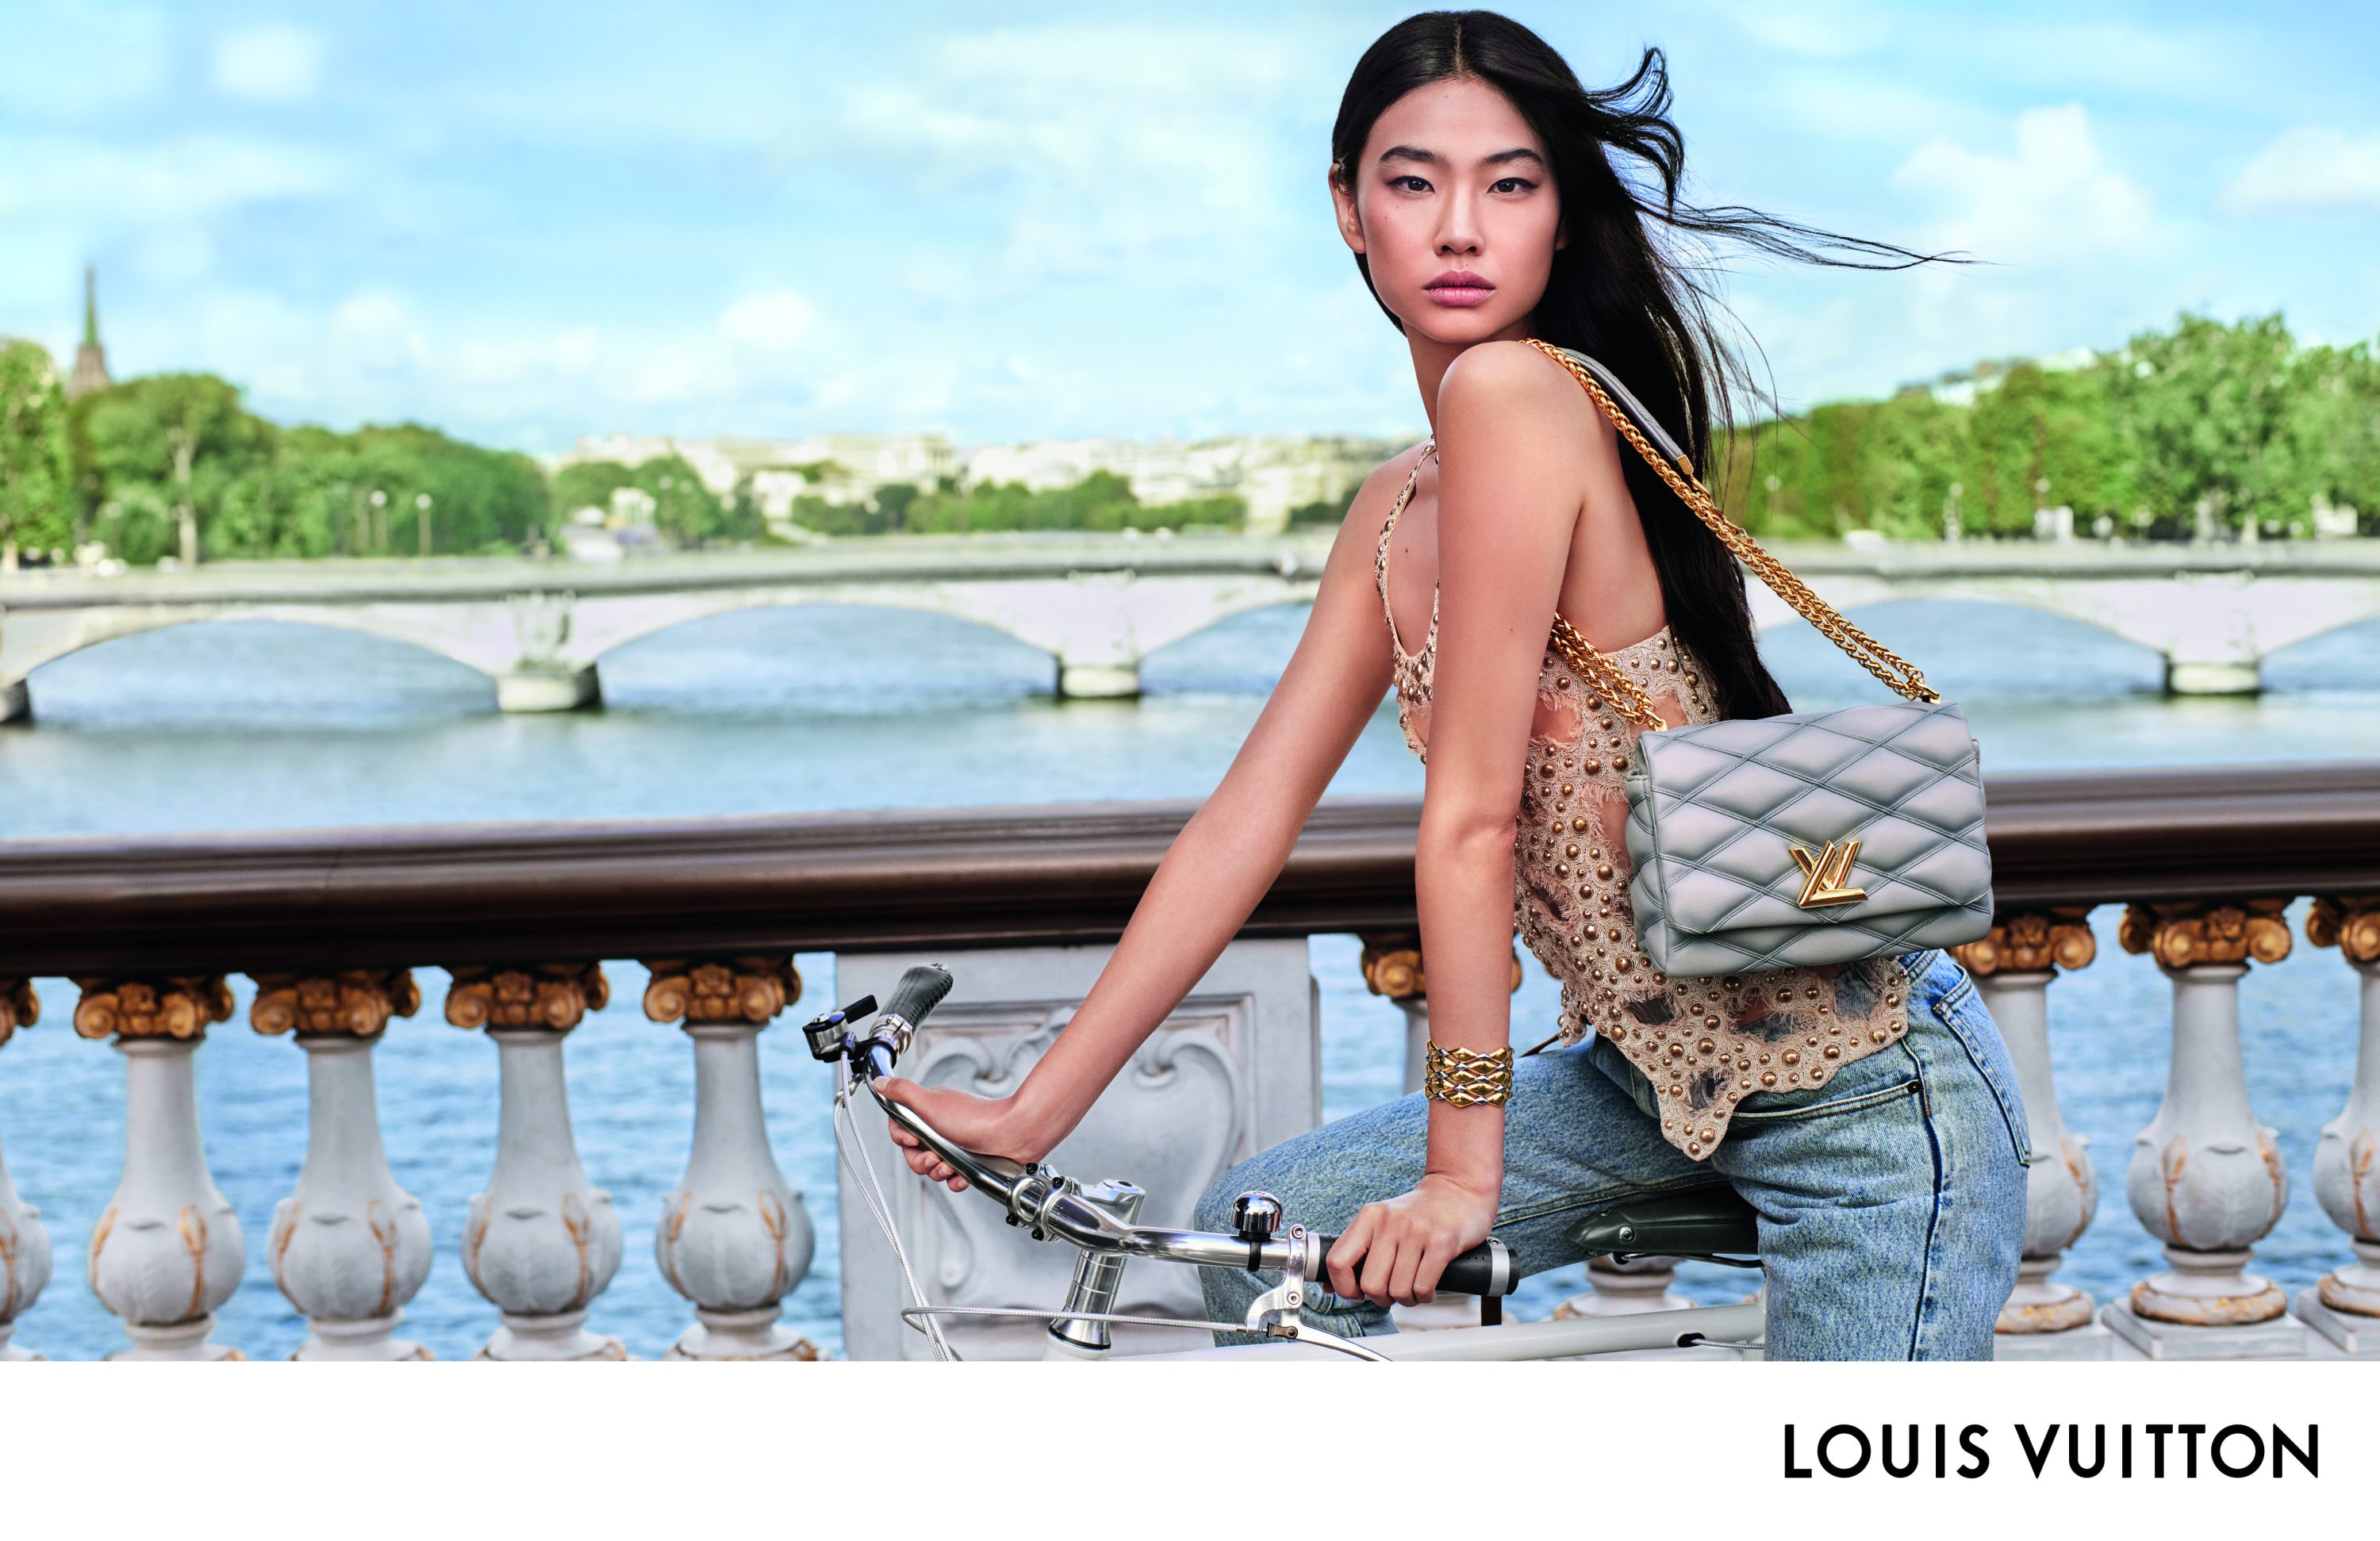 On Louis Vuitton and creativity in advertising - DisneyRollerGirl